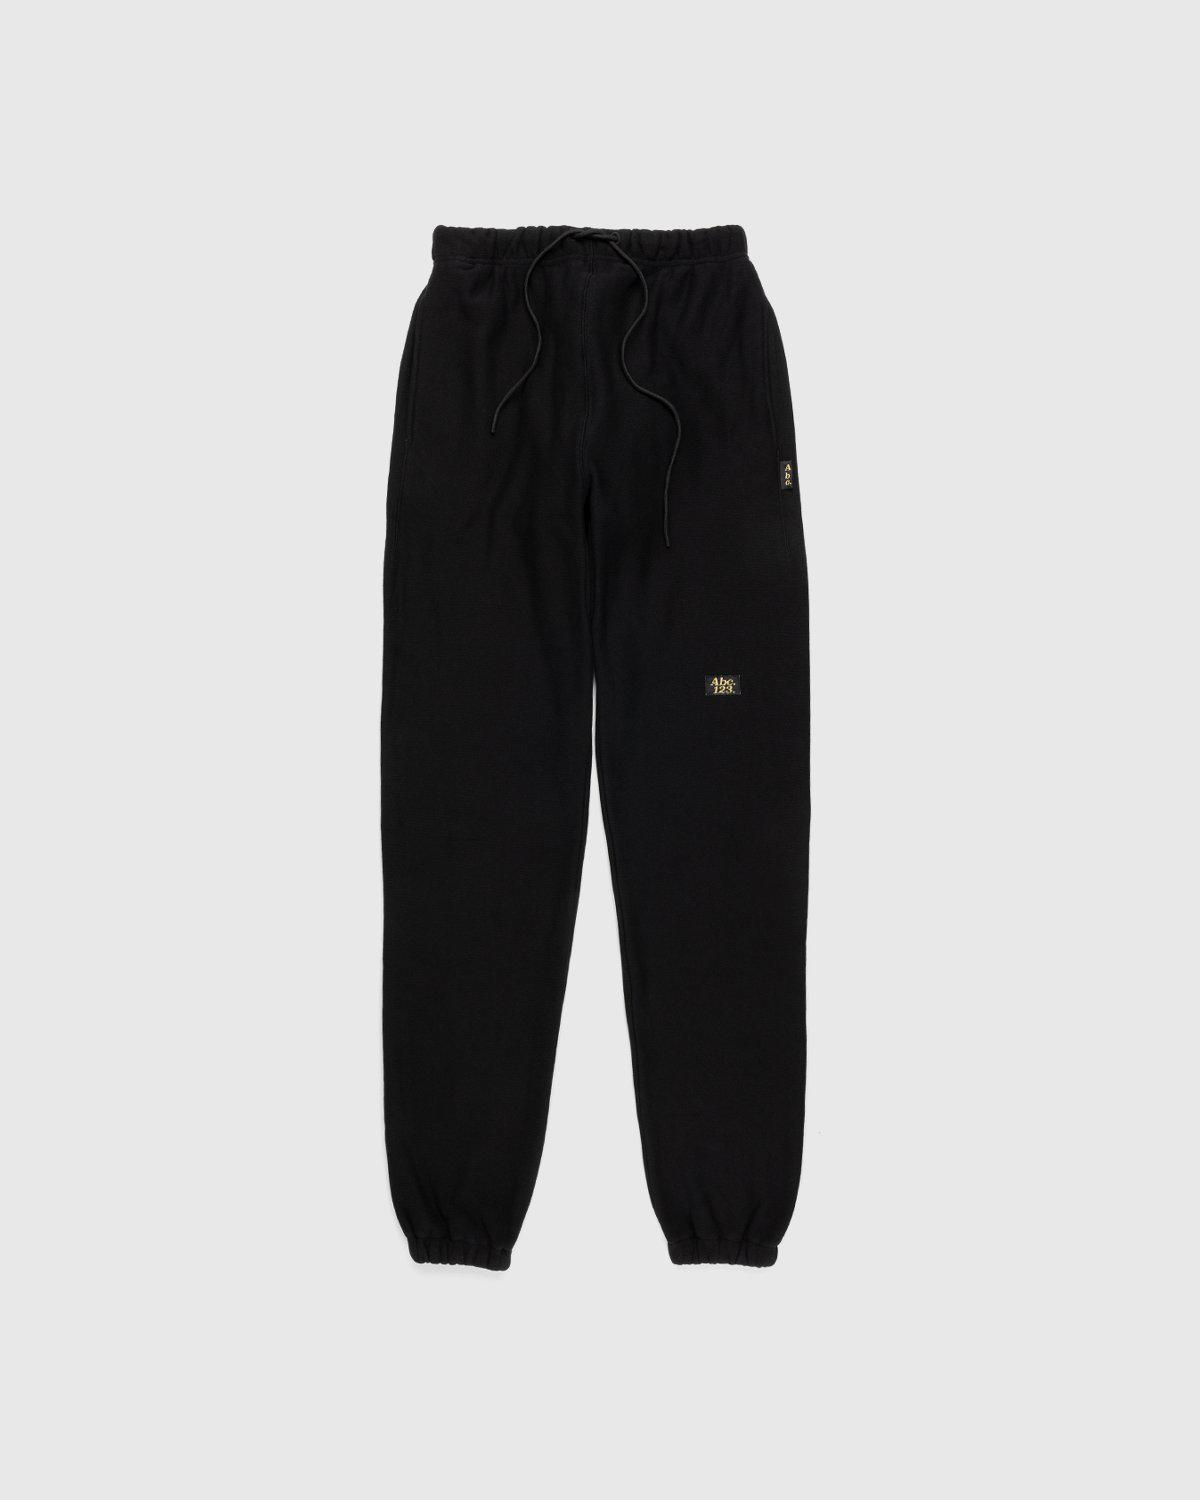 Abc. – French Terry Sweatpants Anthracite by ABC.